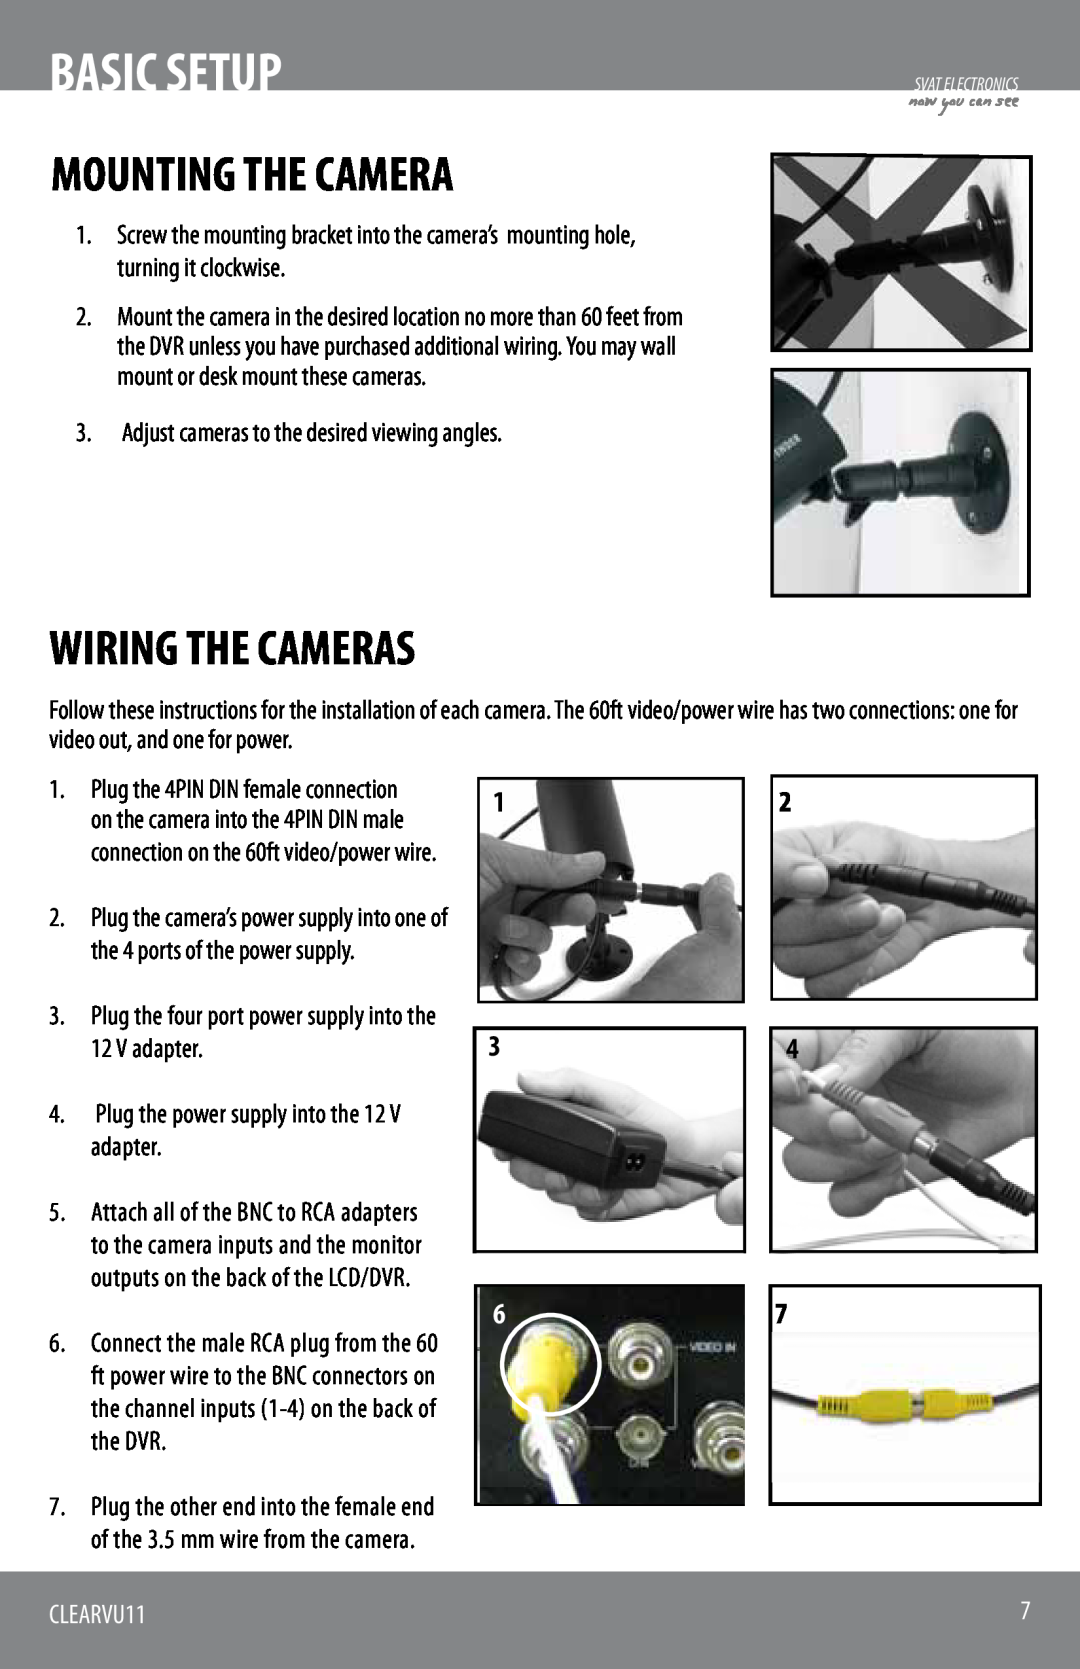 SVAT Electronics CLEARVU11 instruction manual Mounting The Camera, Wiring The Cameras, 2 4 7, Basic Setup, now you can see 